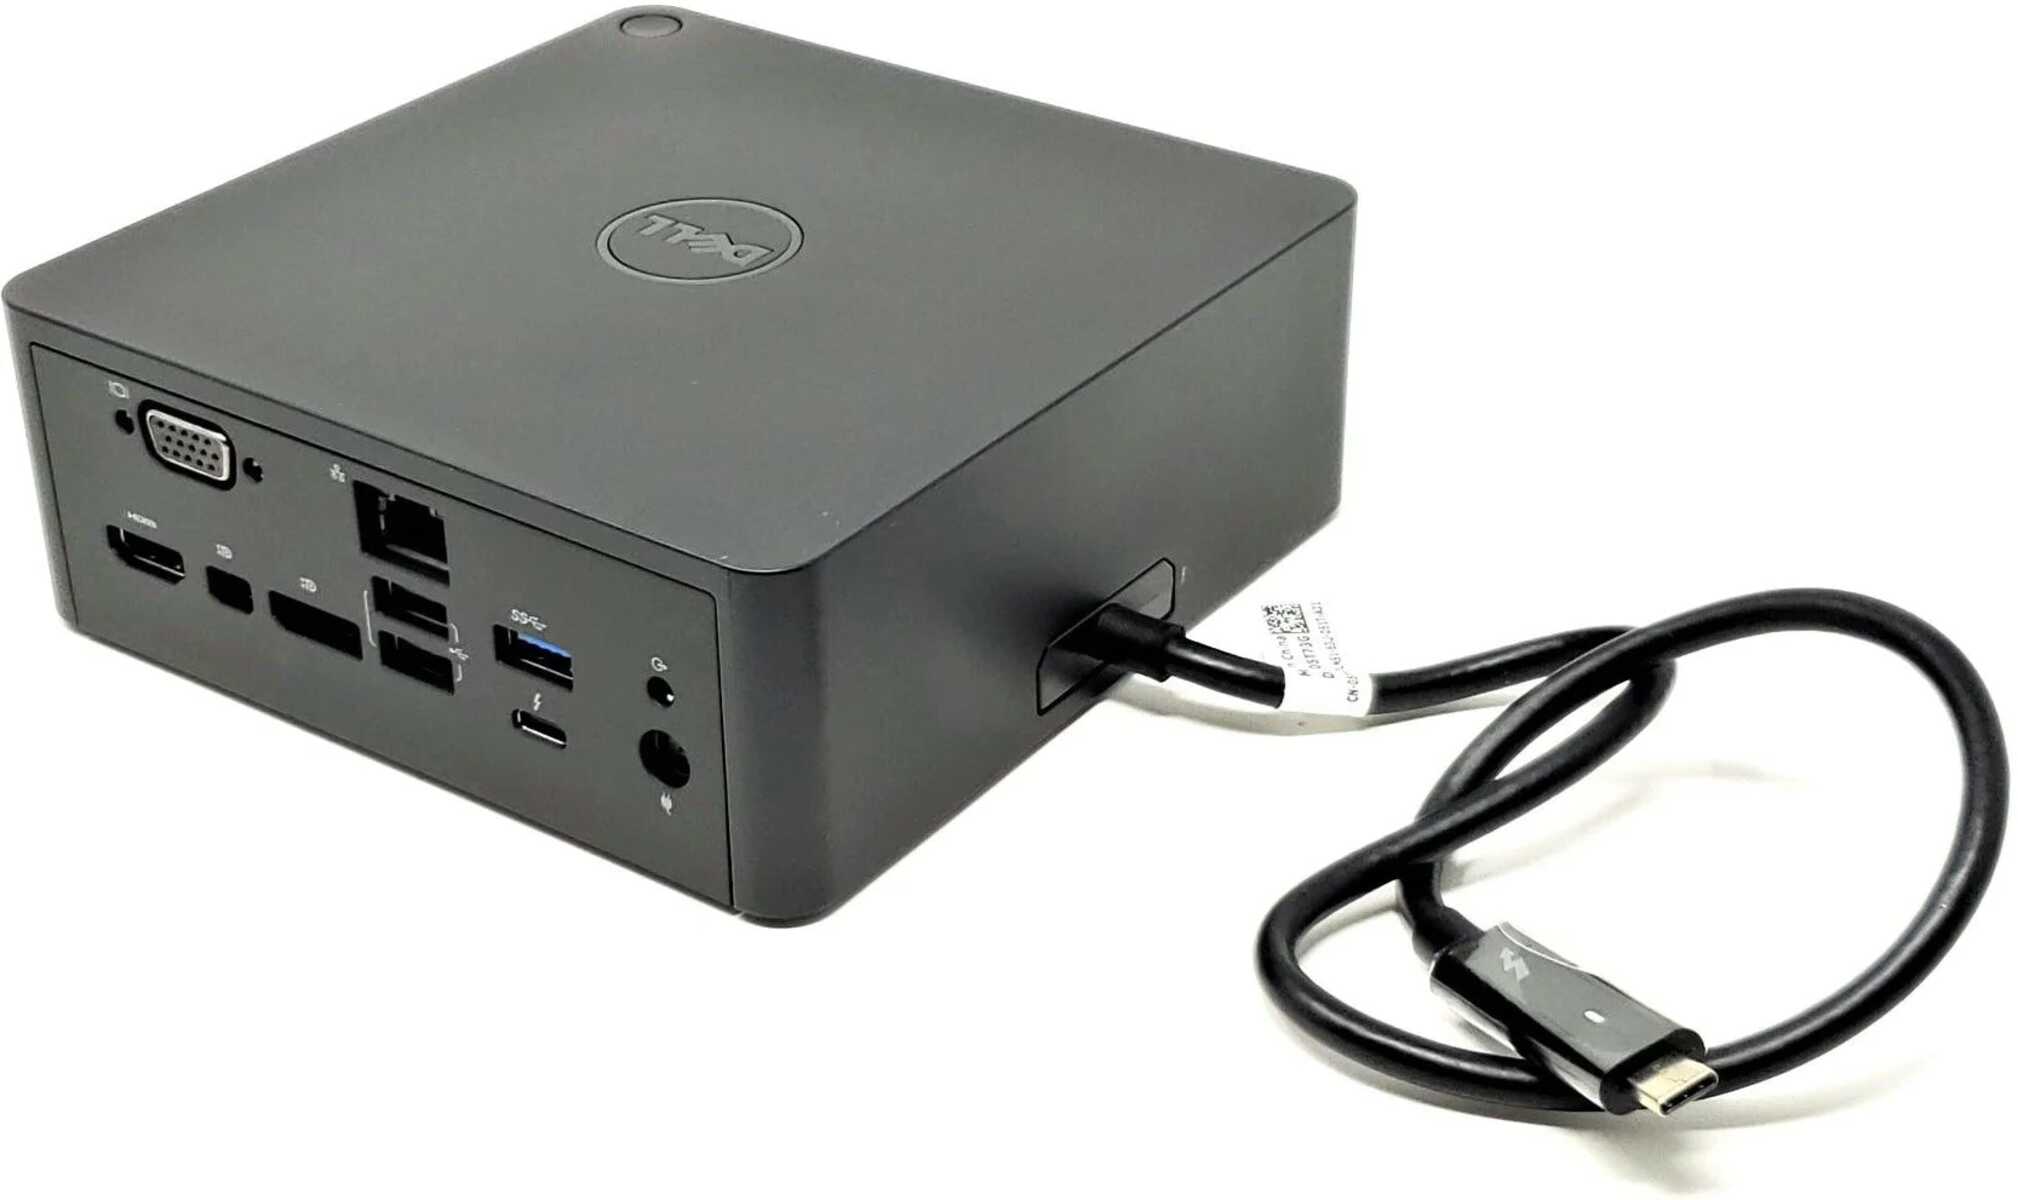 What Is The Need For Dell Thunderbolt Dock TB16 | Robots.net